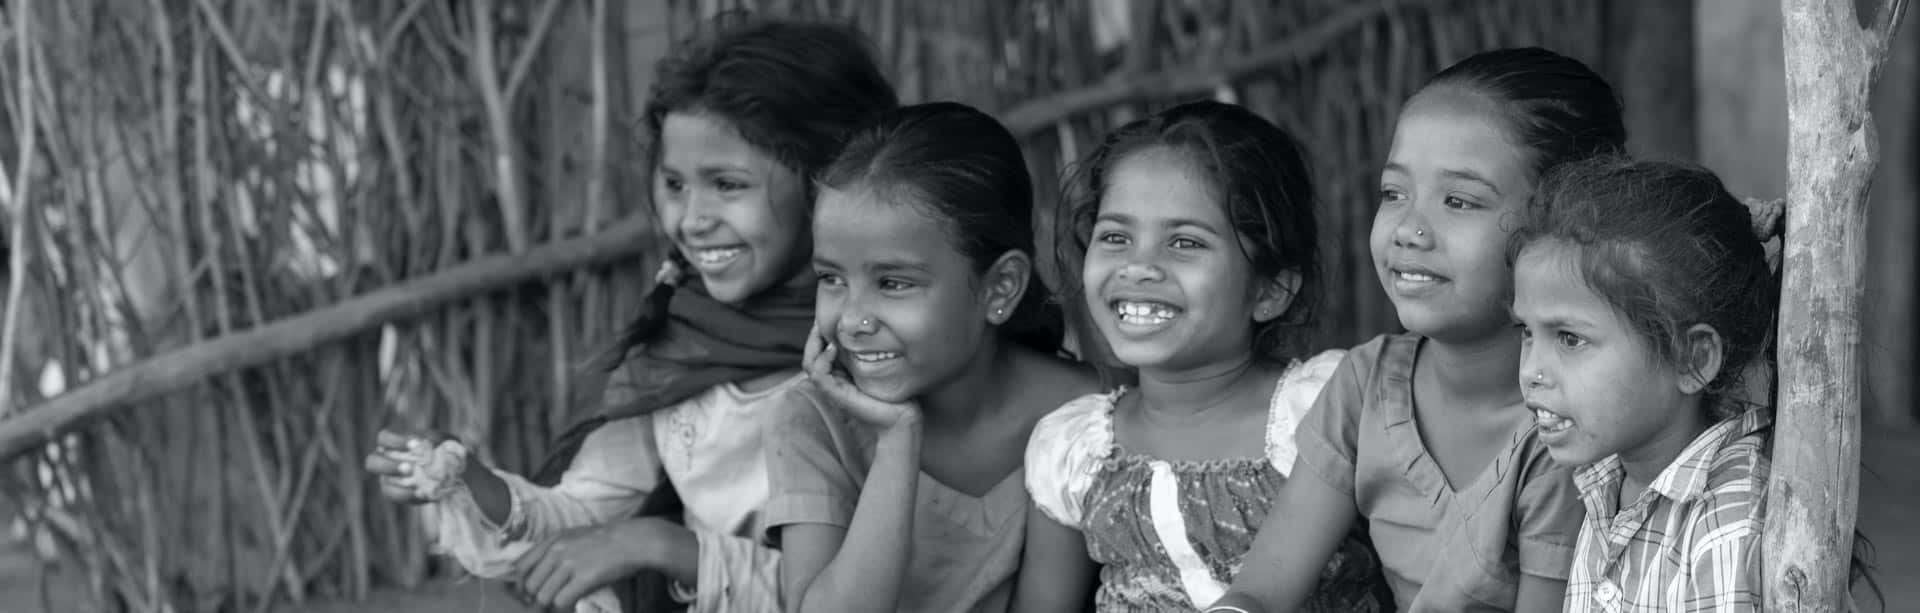 Image of children smiling as representative invite to contact us